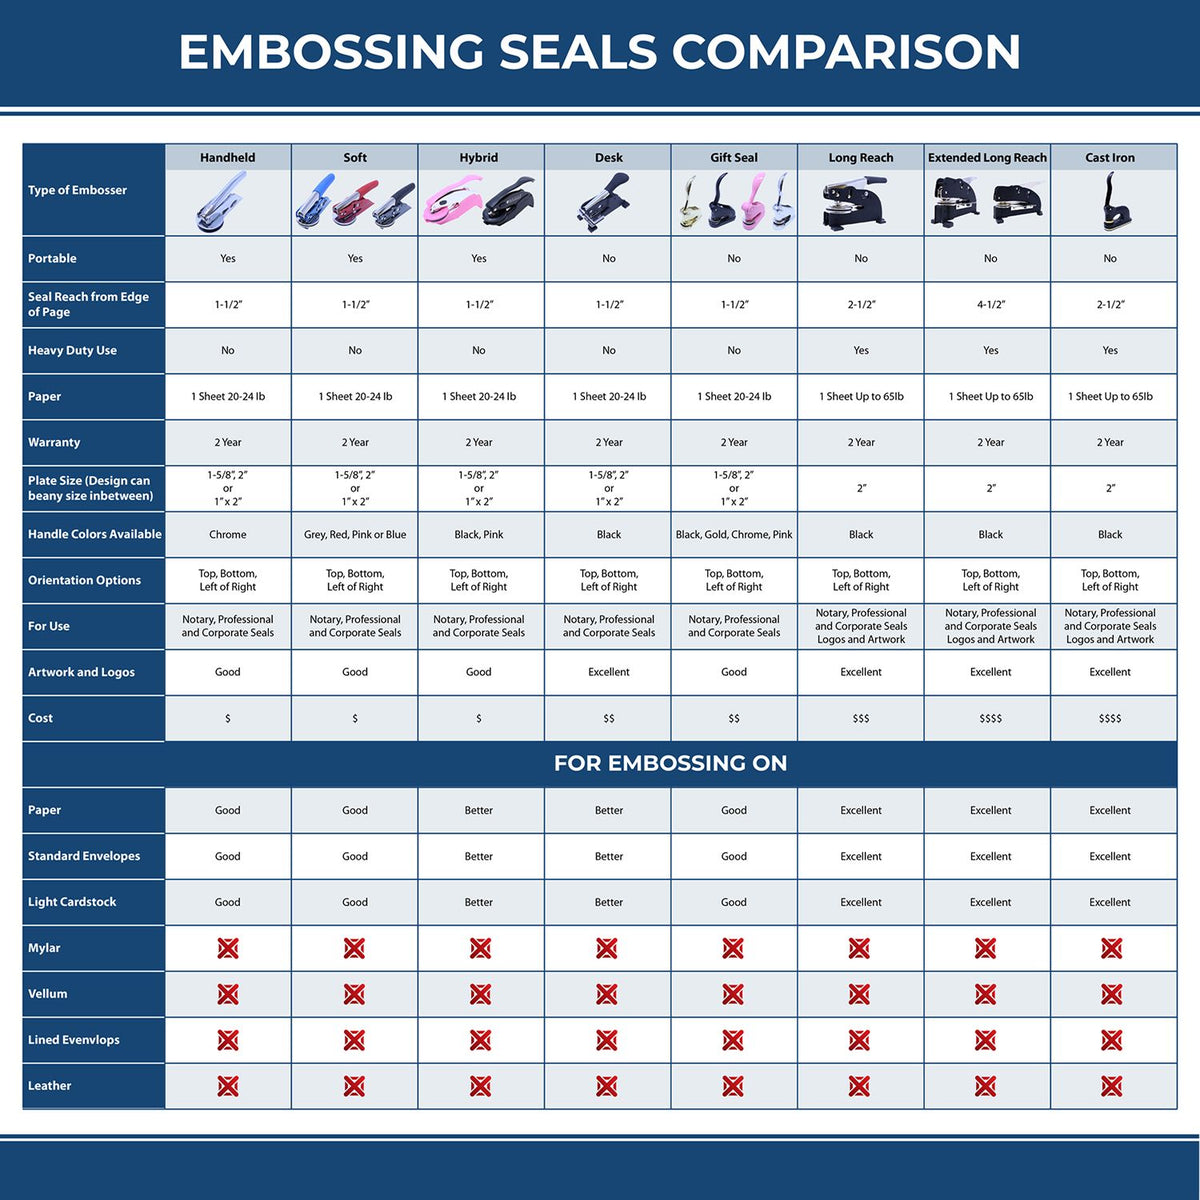 A comparison chart for the different types of mount models available for the Hybrid Alaska Engineer Seal